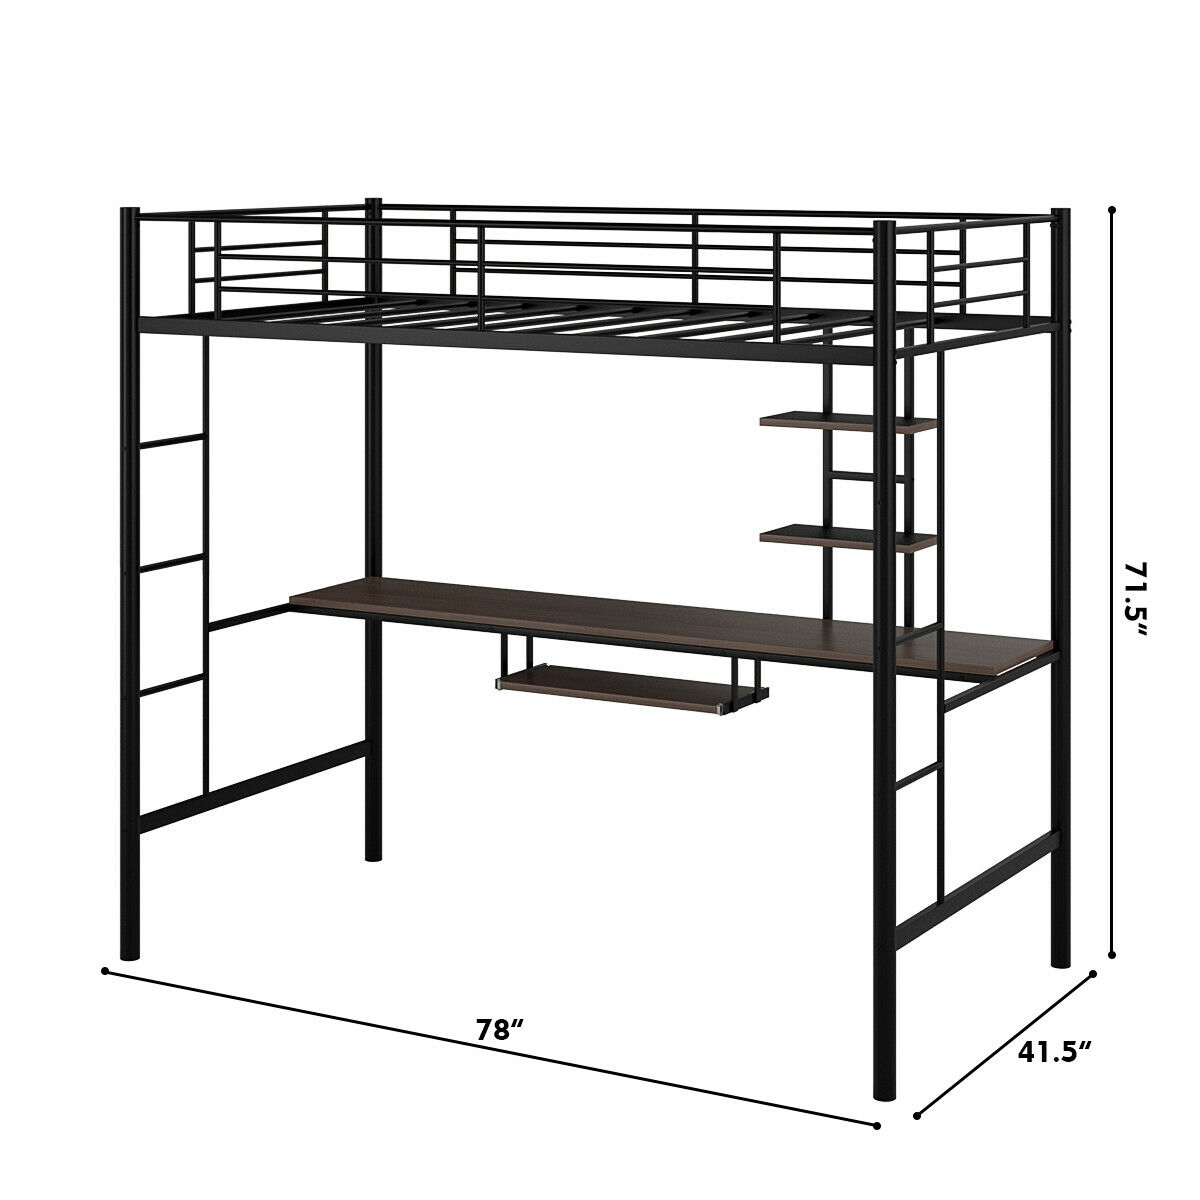 Costway Twin Size Loft Bunk Bed Metal, How Long Is A Twin Size Bunk Bed